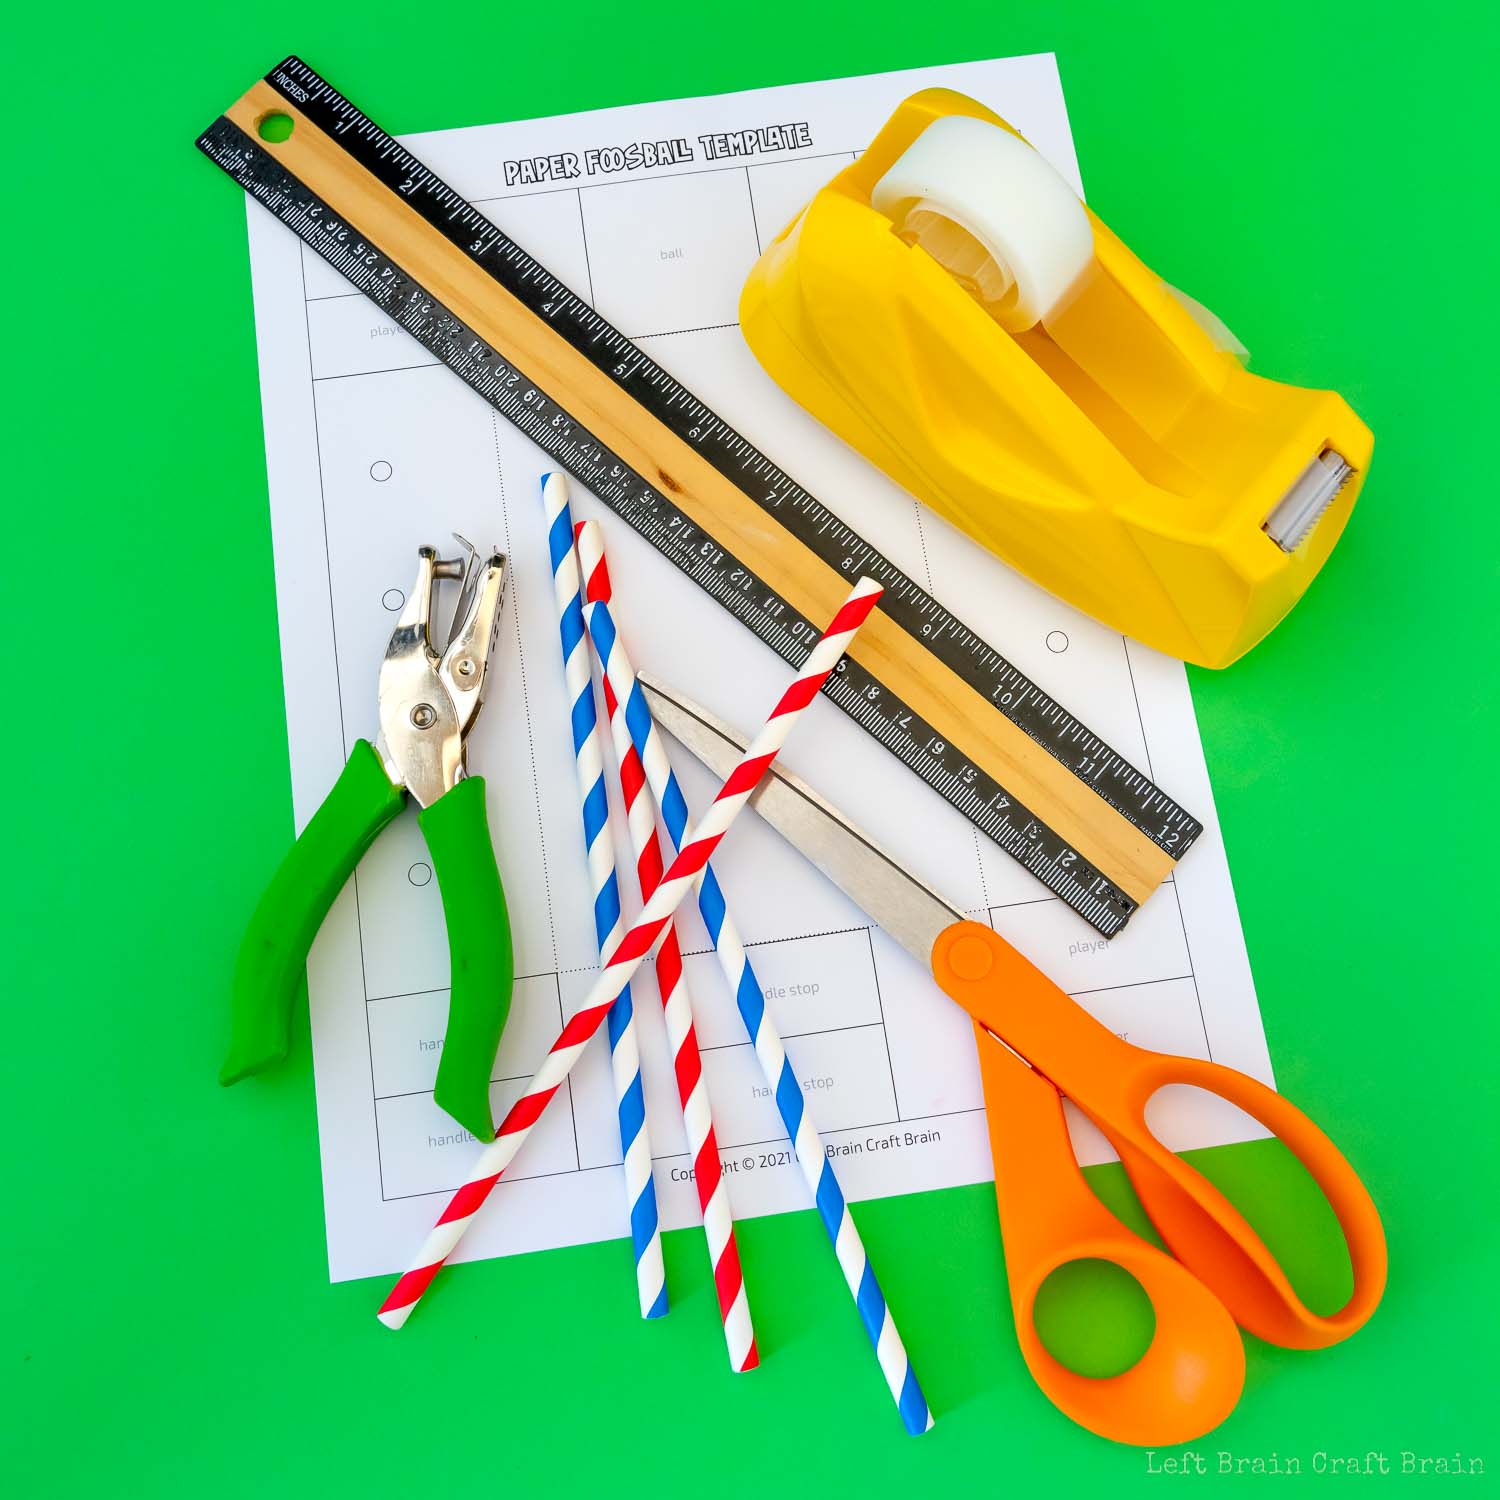 paper foosball supplies (green hole punch, red and blue striped paper straws, orange-handled scissors, yellow tape dispenser, black and wood ruler, white paper template on green paper background)